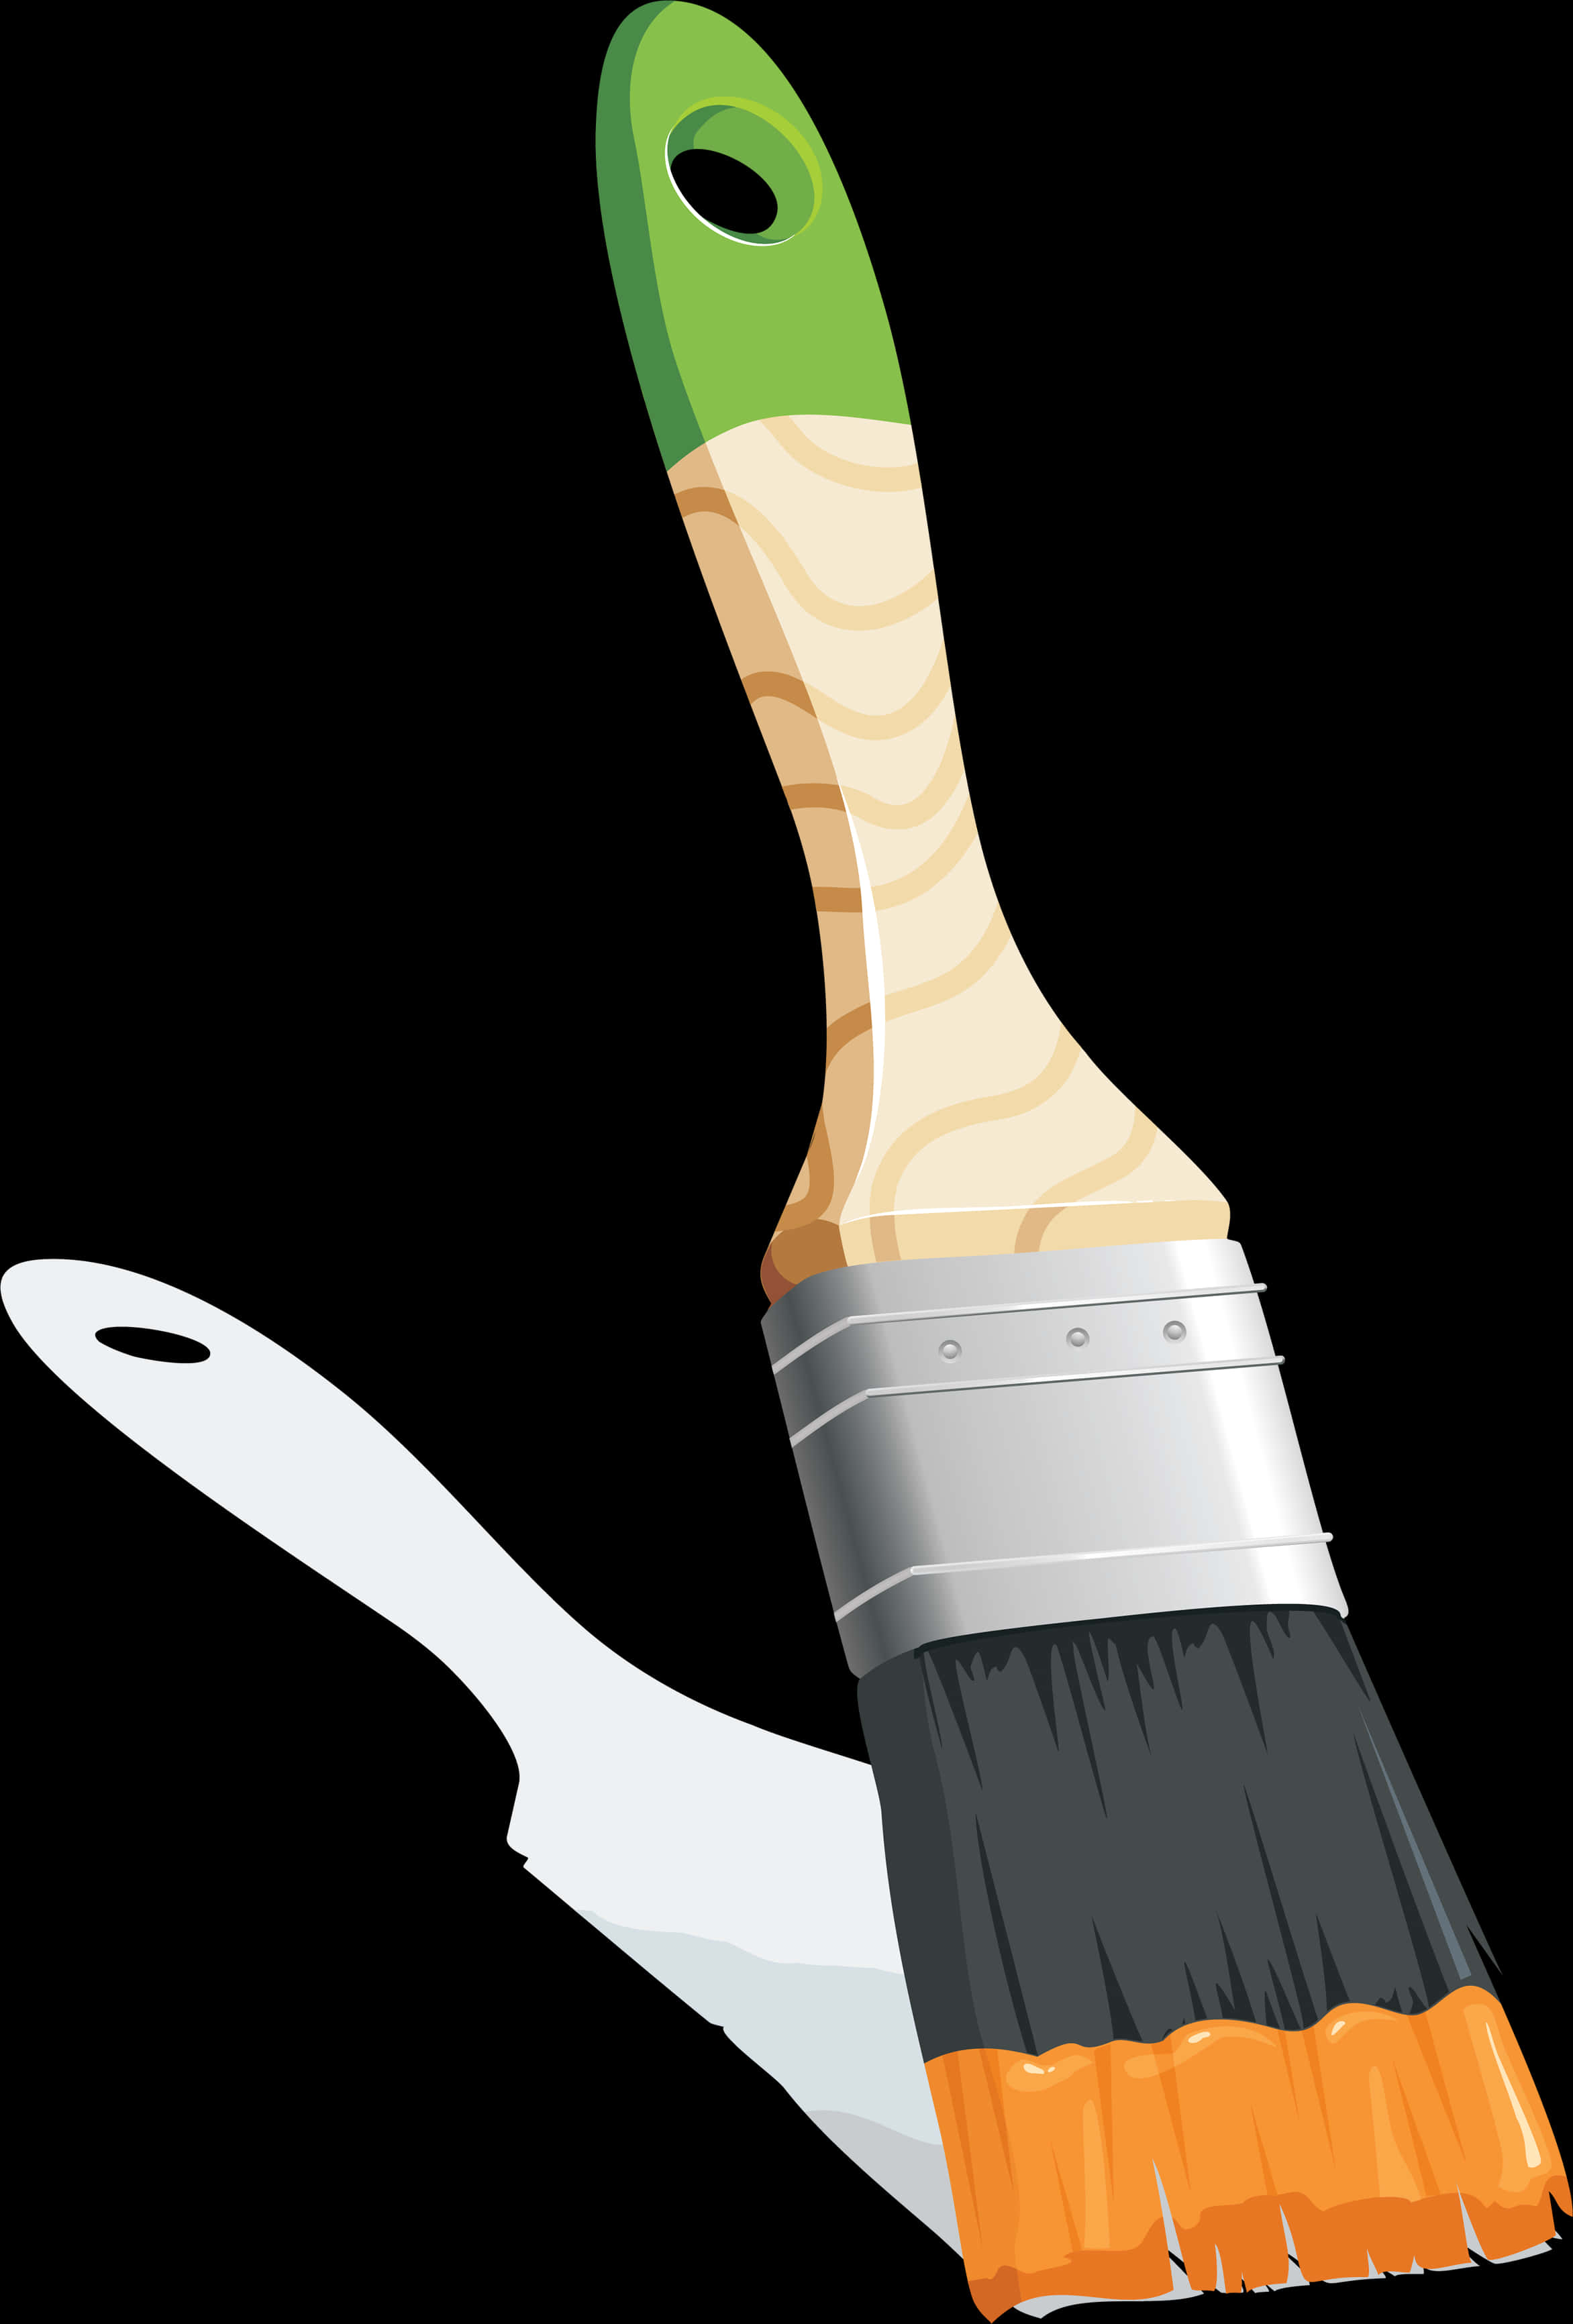 A Paint Brush With A Green Handle